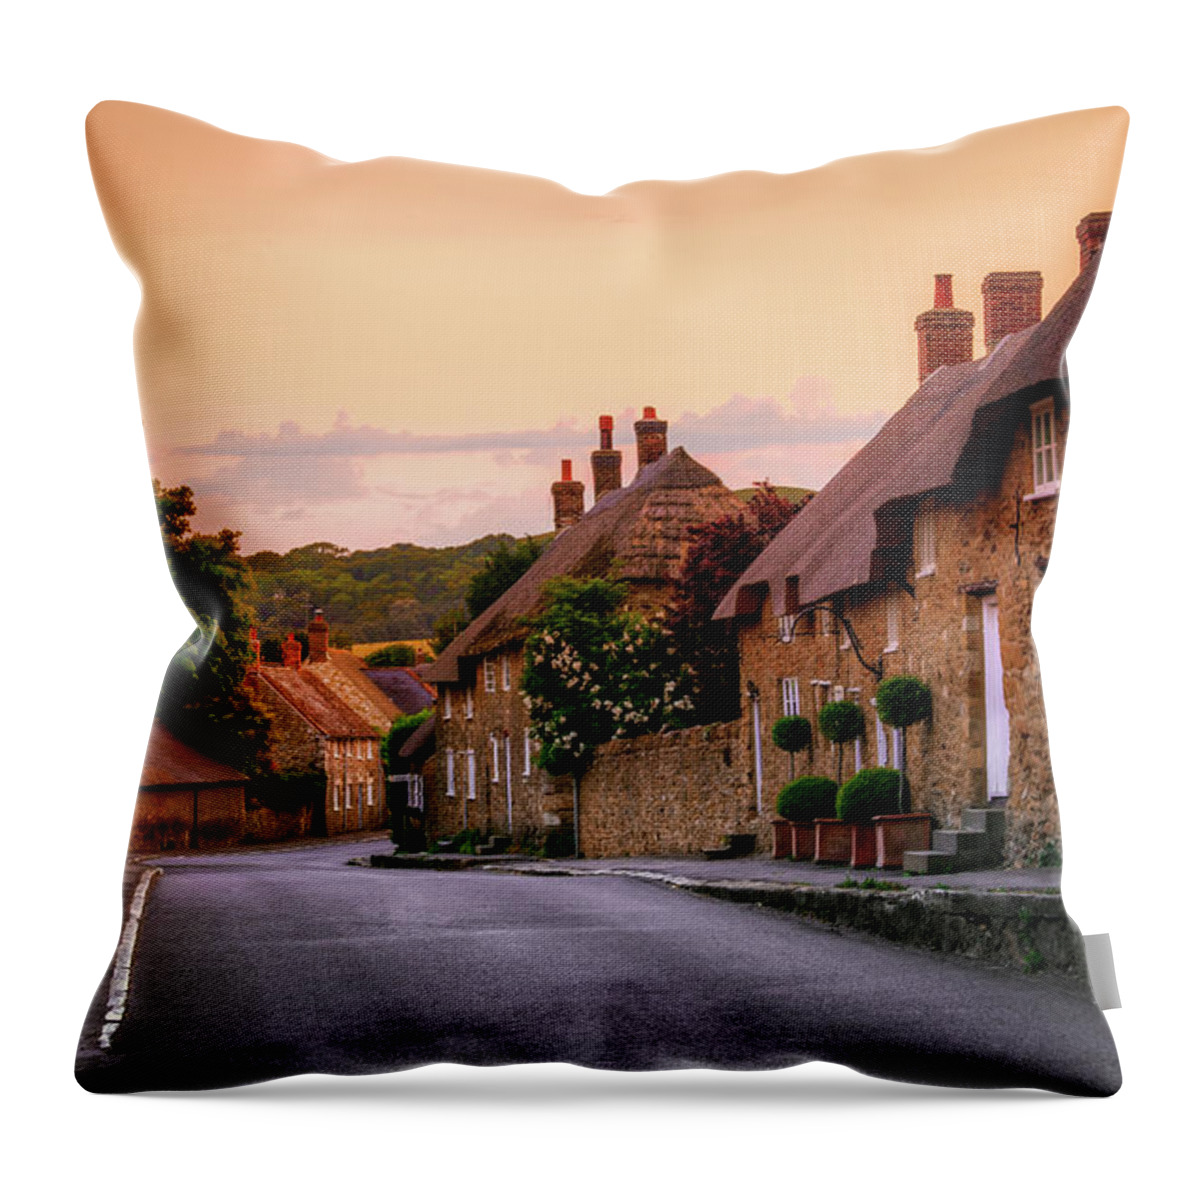 Tranquility Throw Pillow featuring the photograph Street At Abbotsbury, Dorset, England by Joe Daniel Price